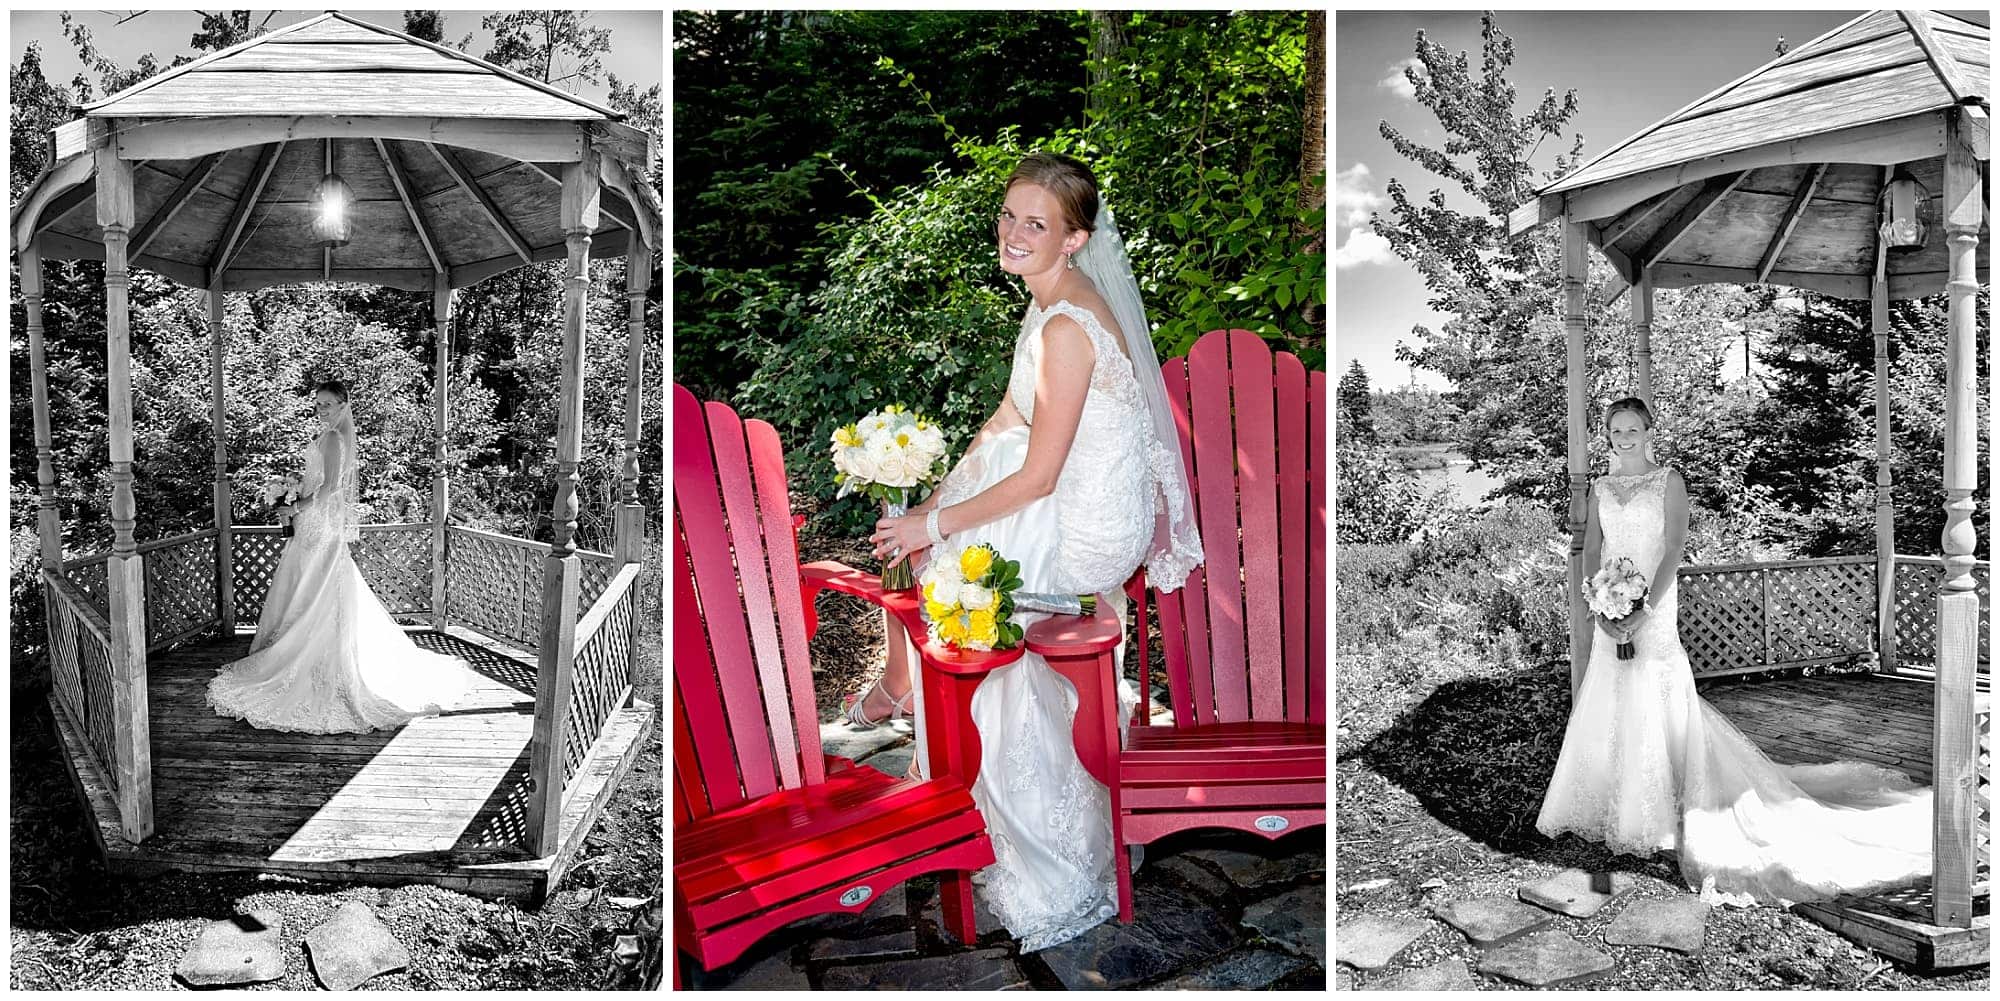 The bridal wedding photos of the bride among a gazebo and sitting on red chairs at her parent's home in Cole Harbour.